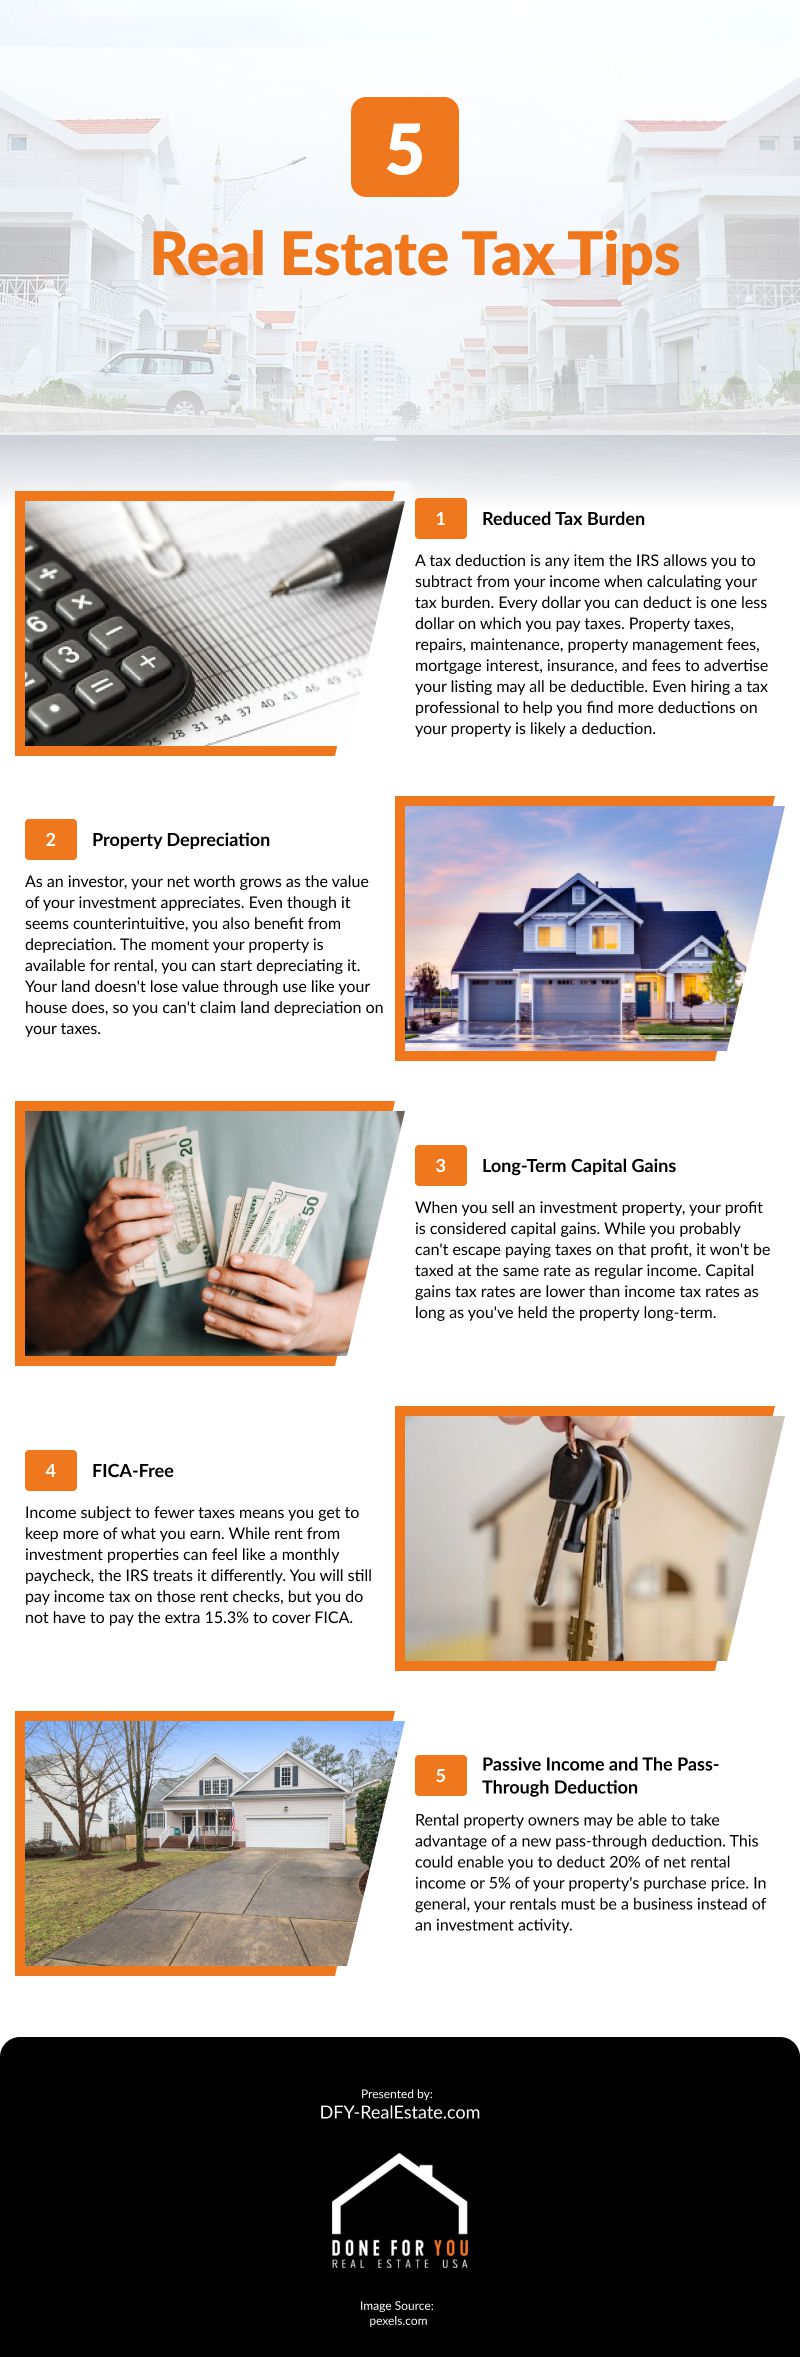 5 Real Estate Tax Tips Infographic